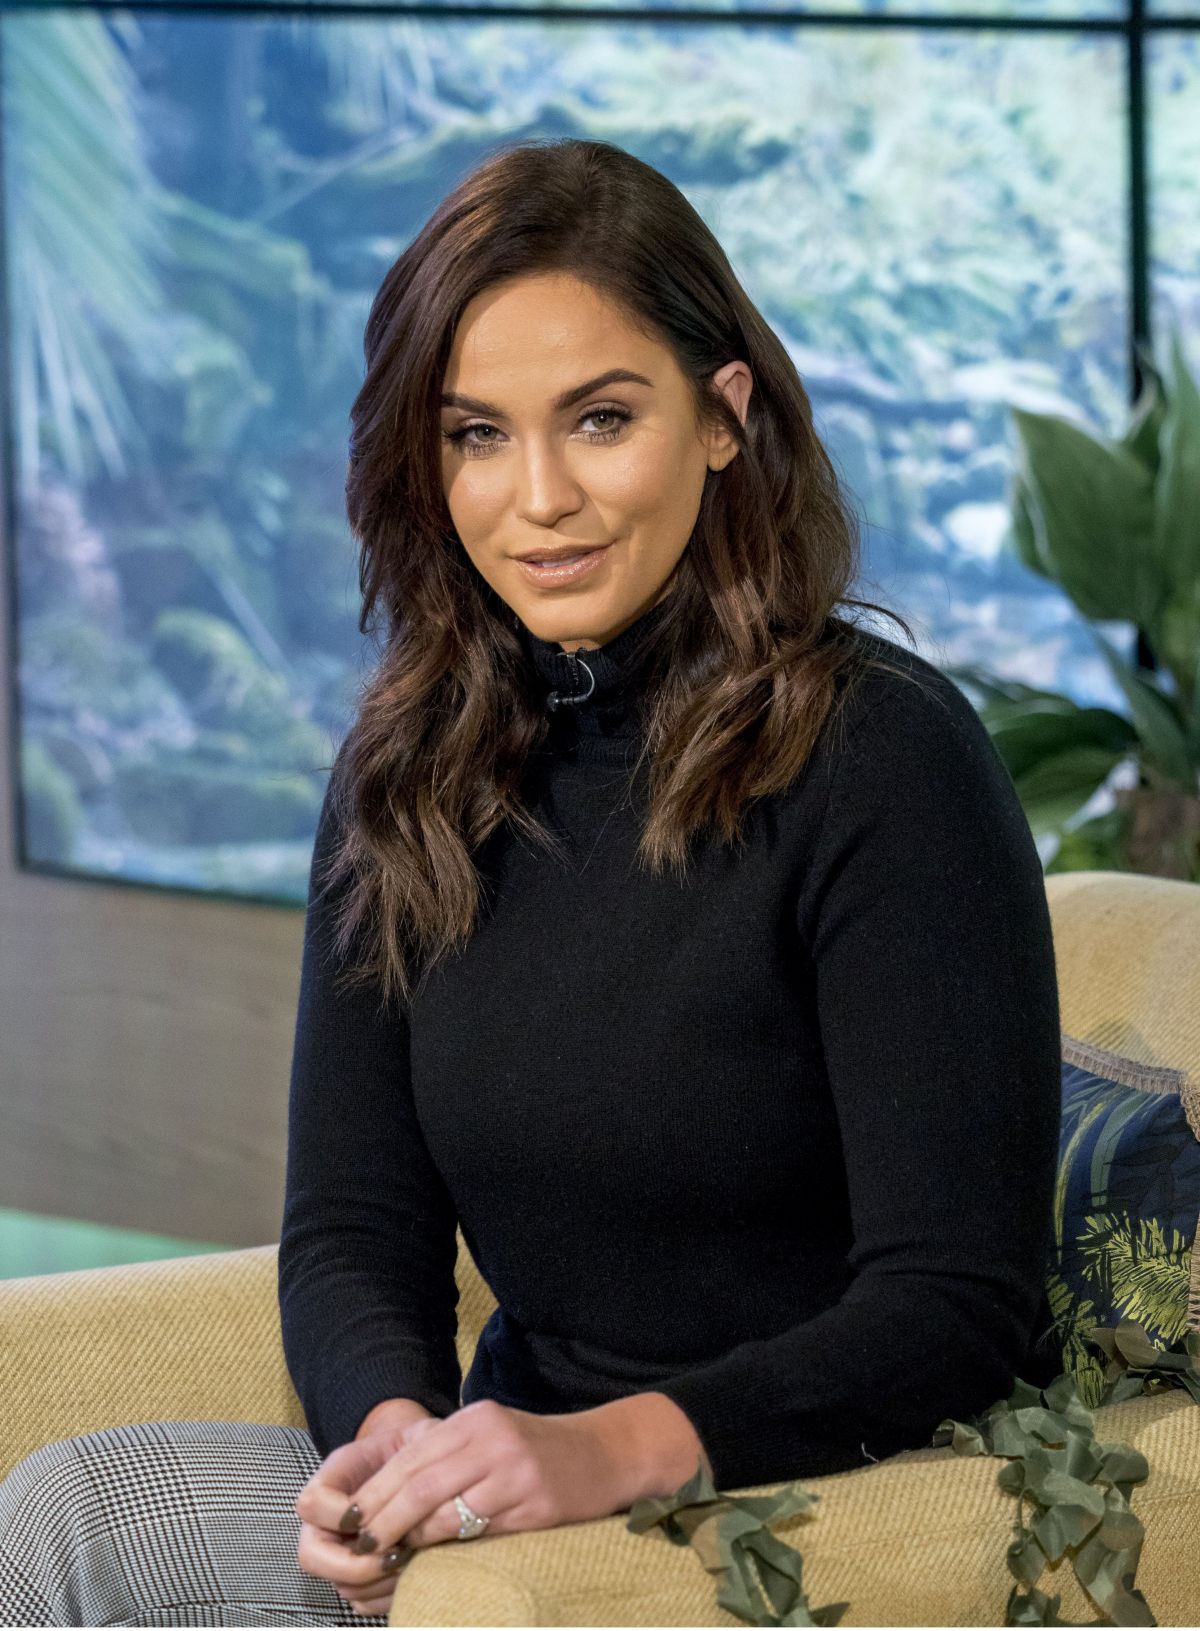 VICKY PATTISON at This Morning Show in London 11/20/2017 – HawtCelebs